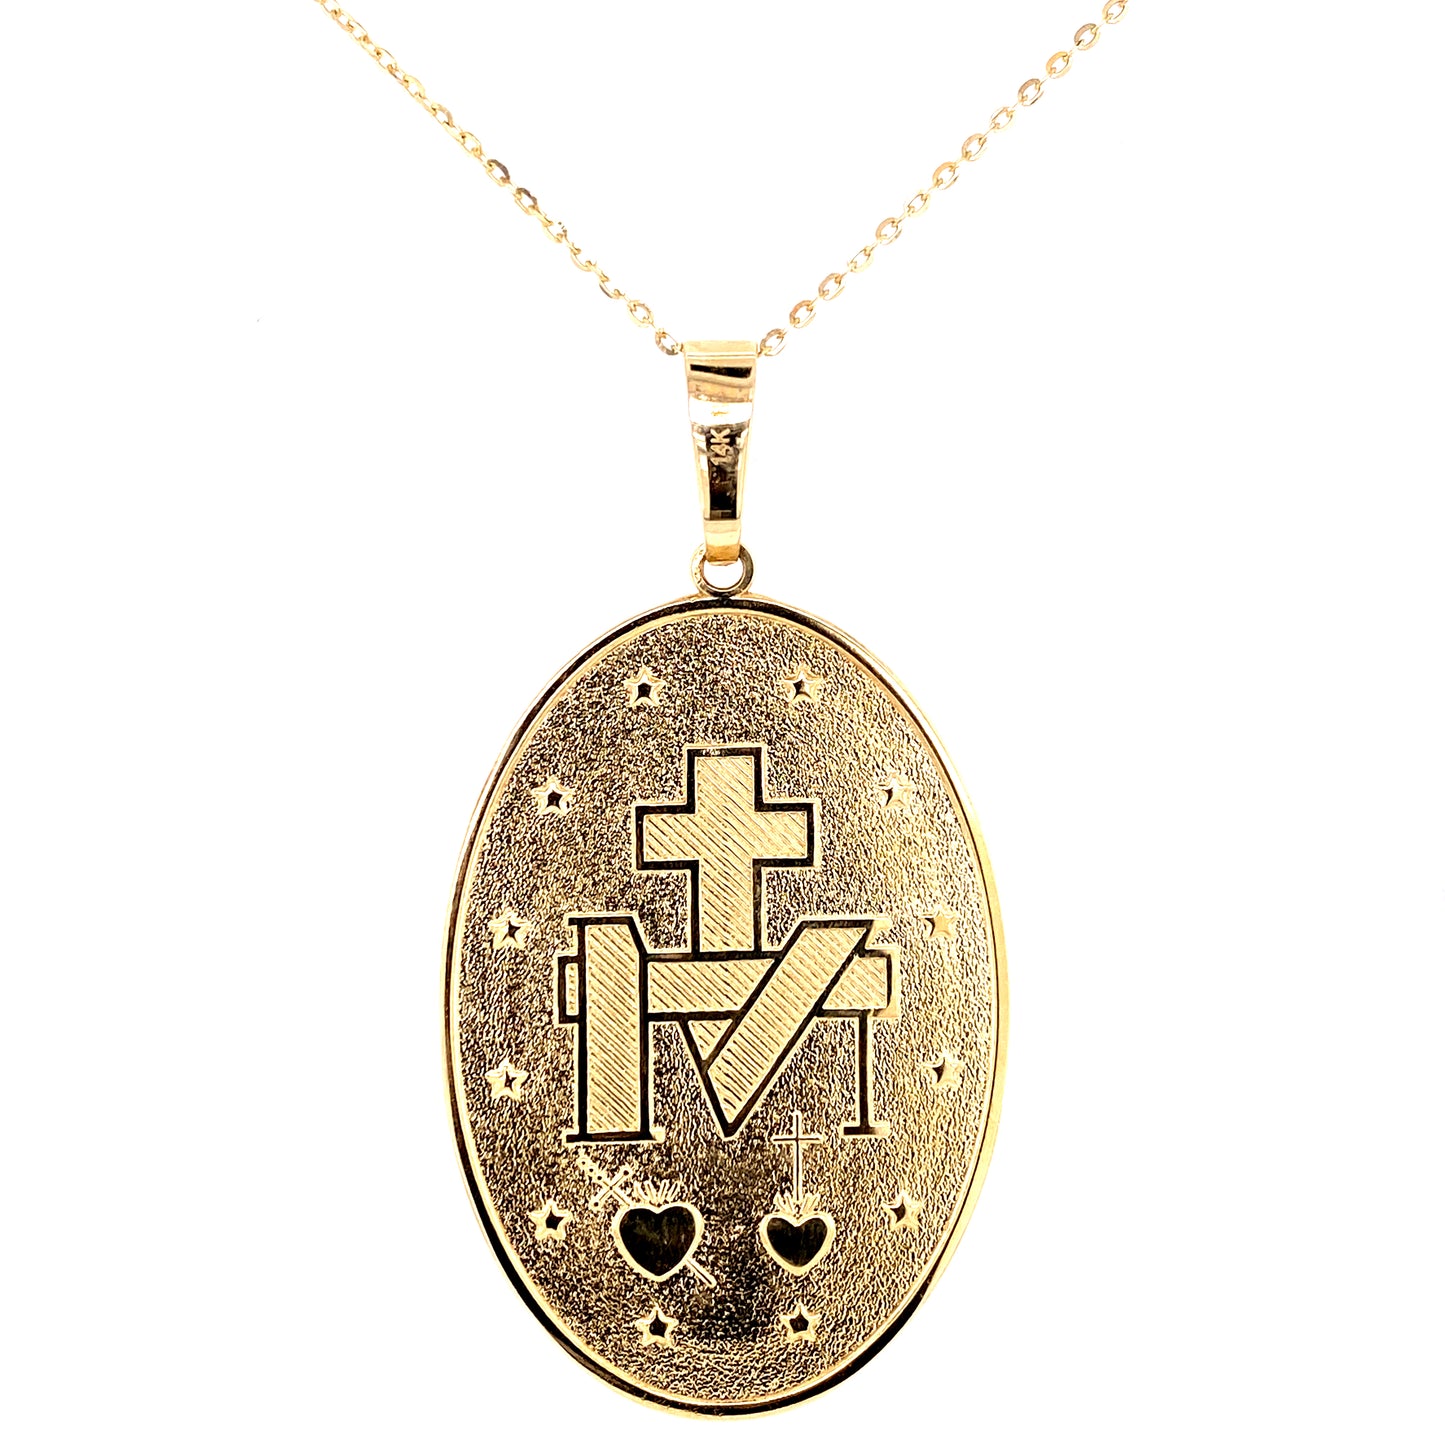 Oval Miraculous Medal (40mmX 28mm) 14K Yellow Gold